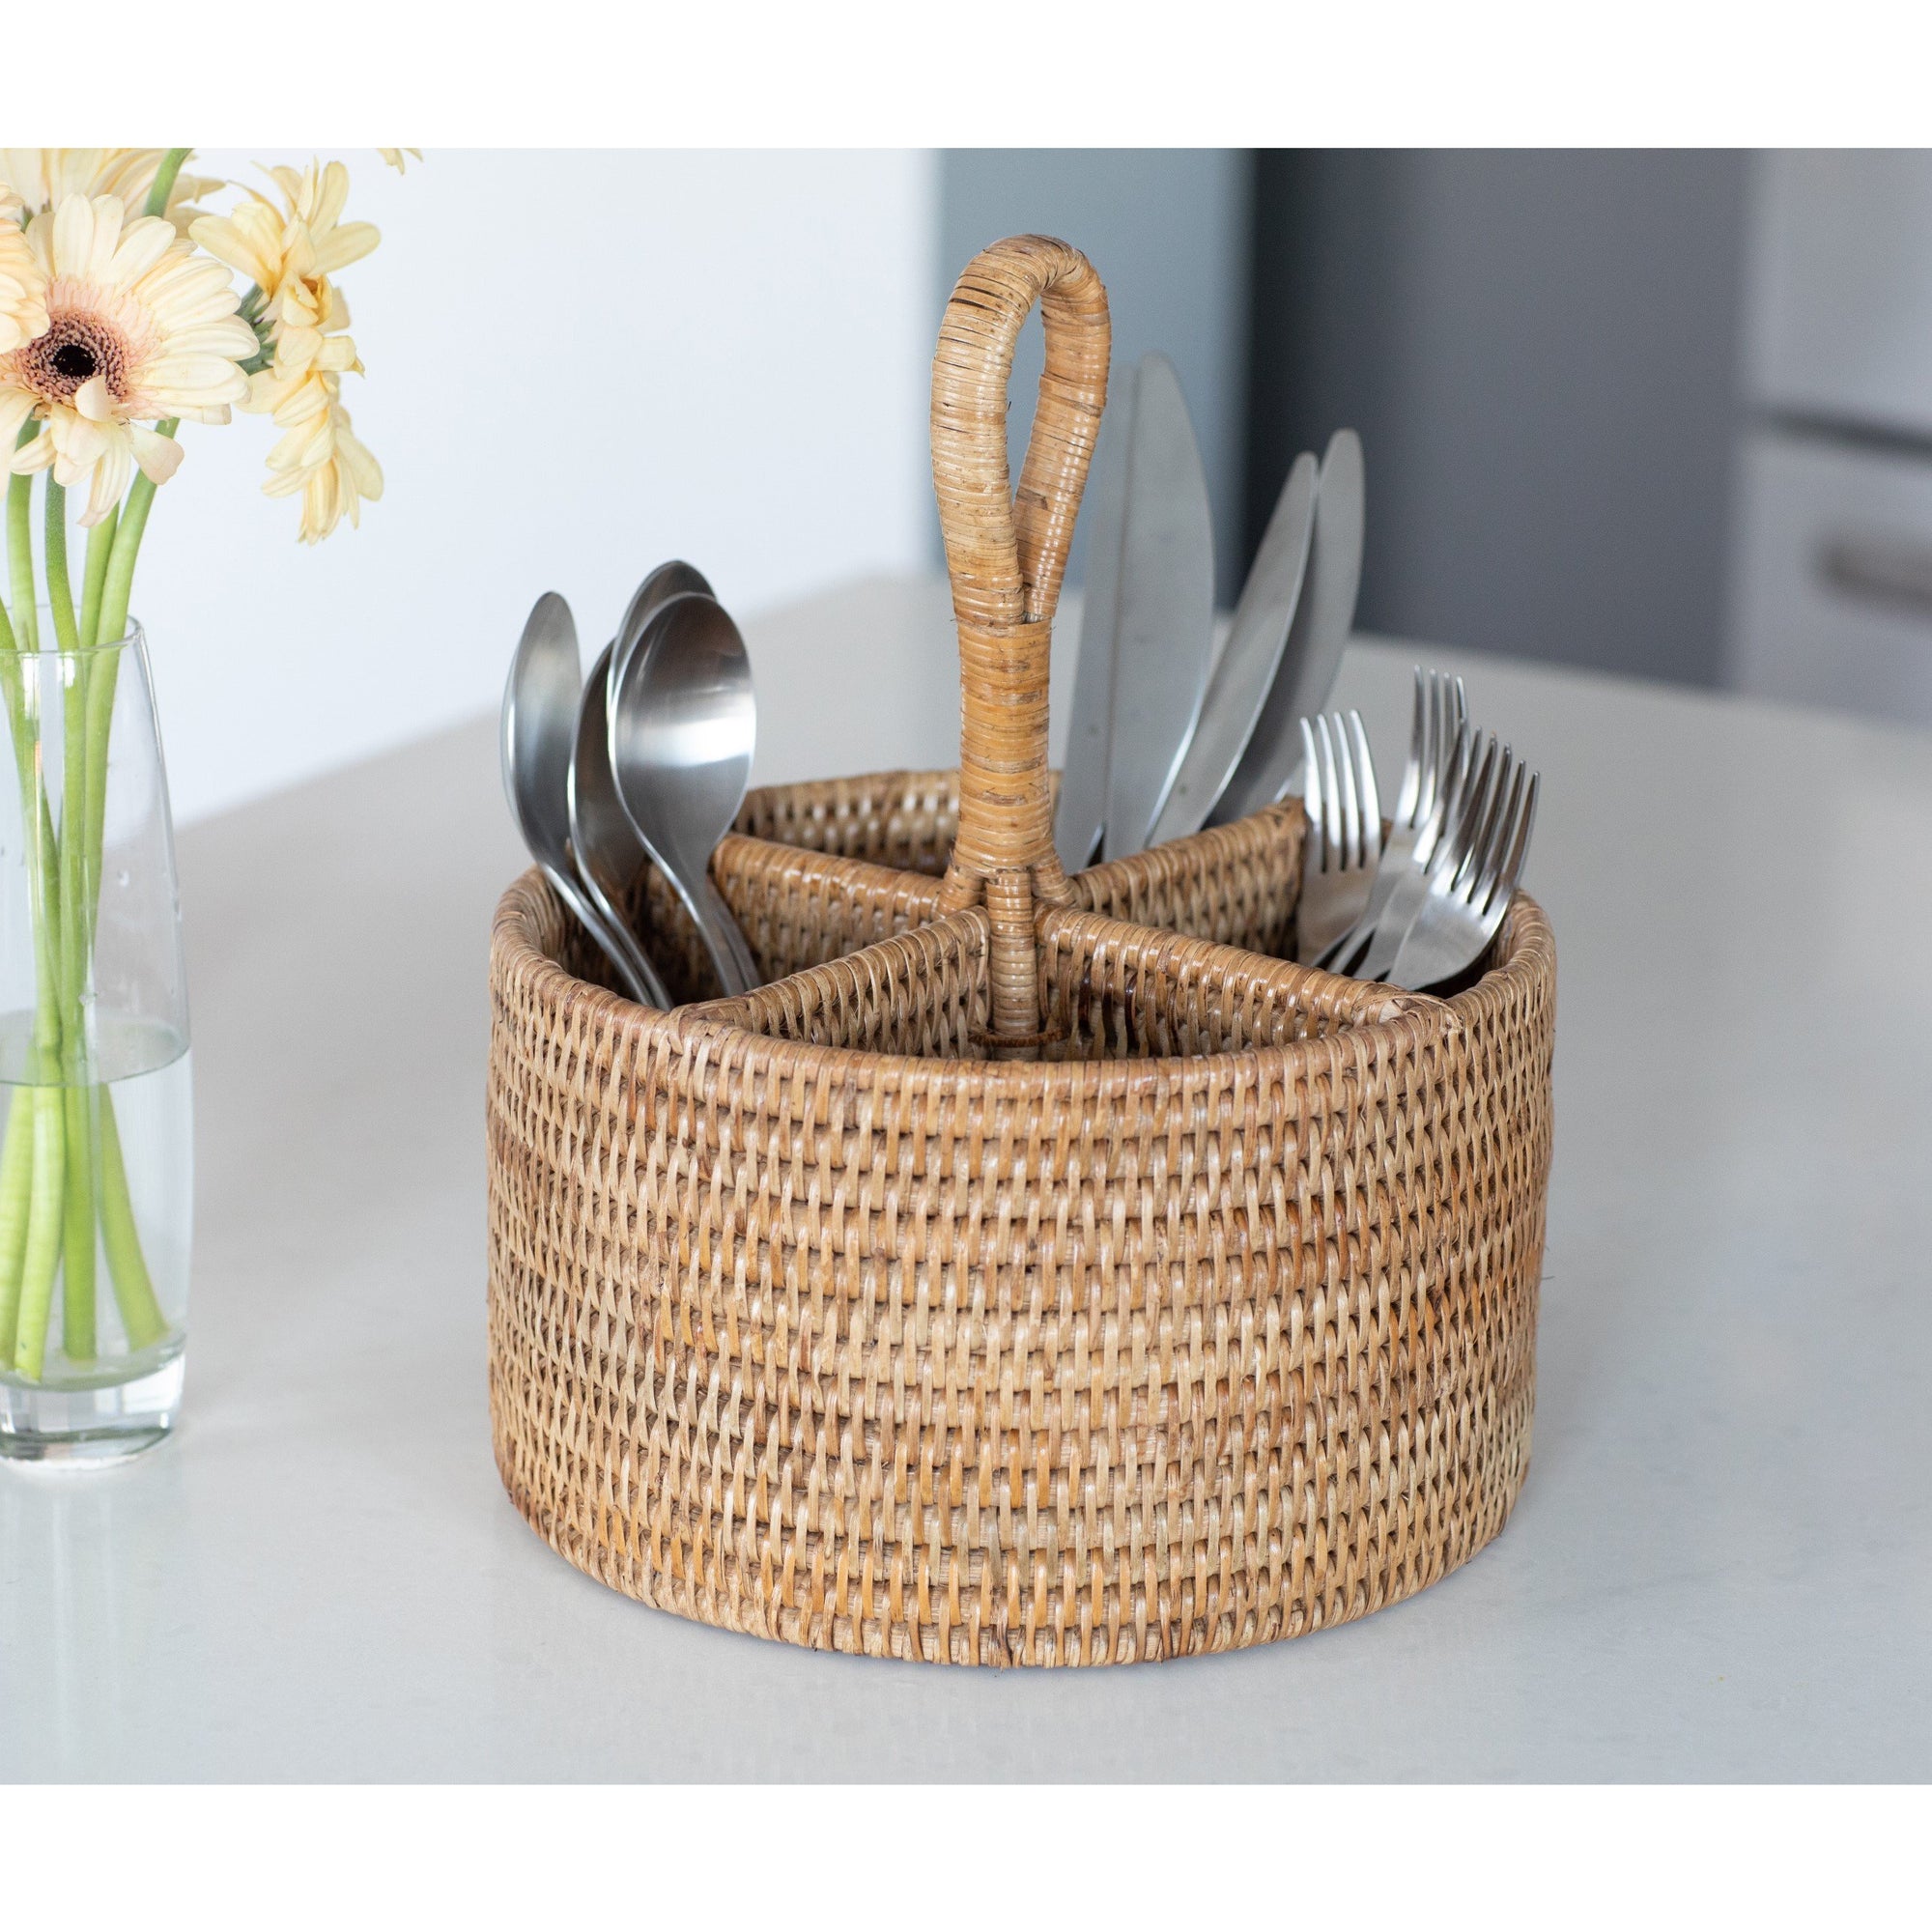 4 section Caddy/Cutlery Holder